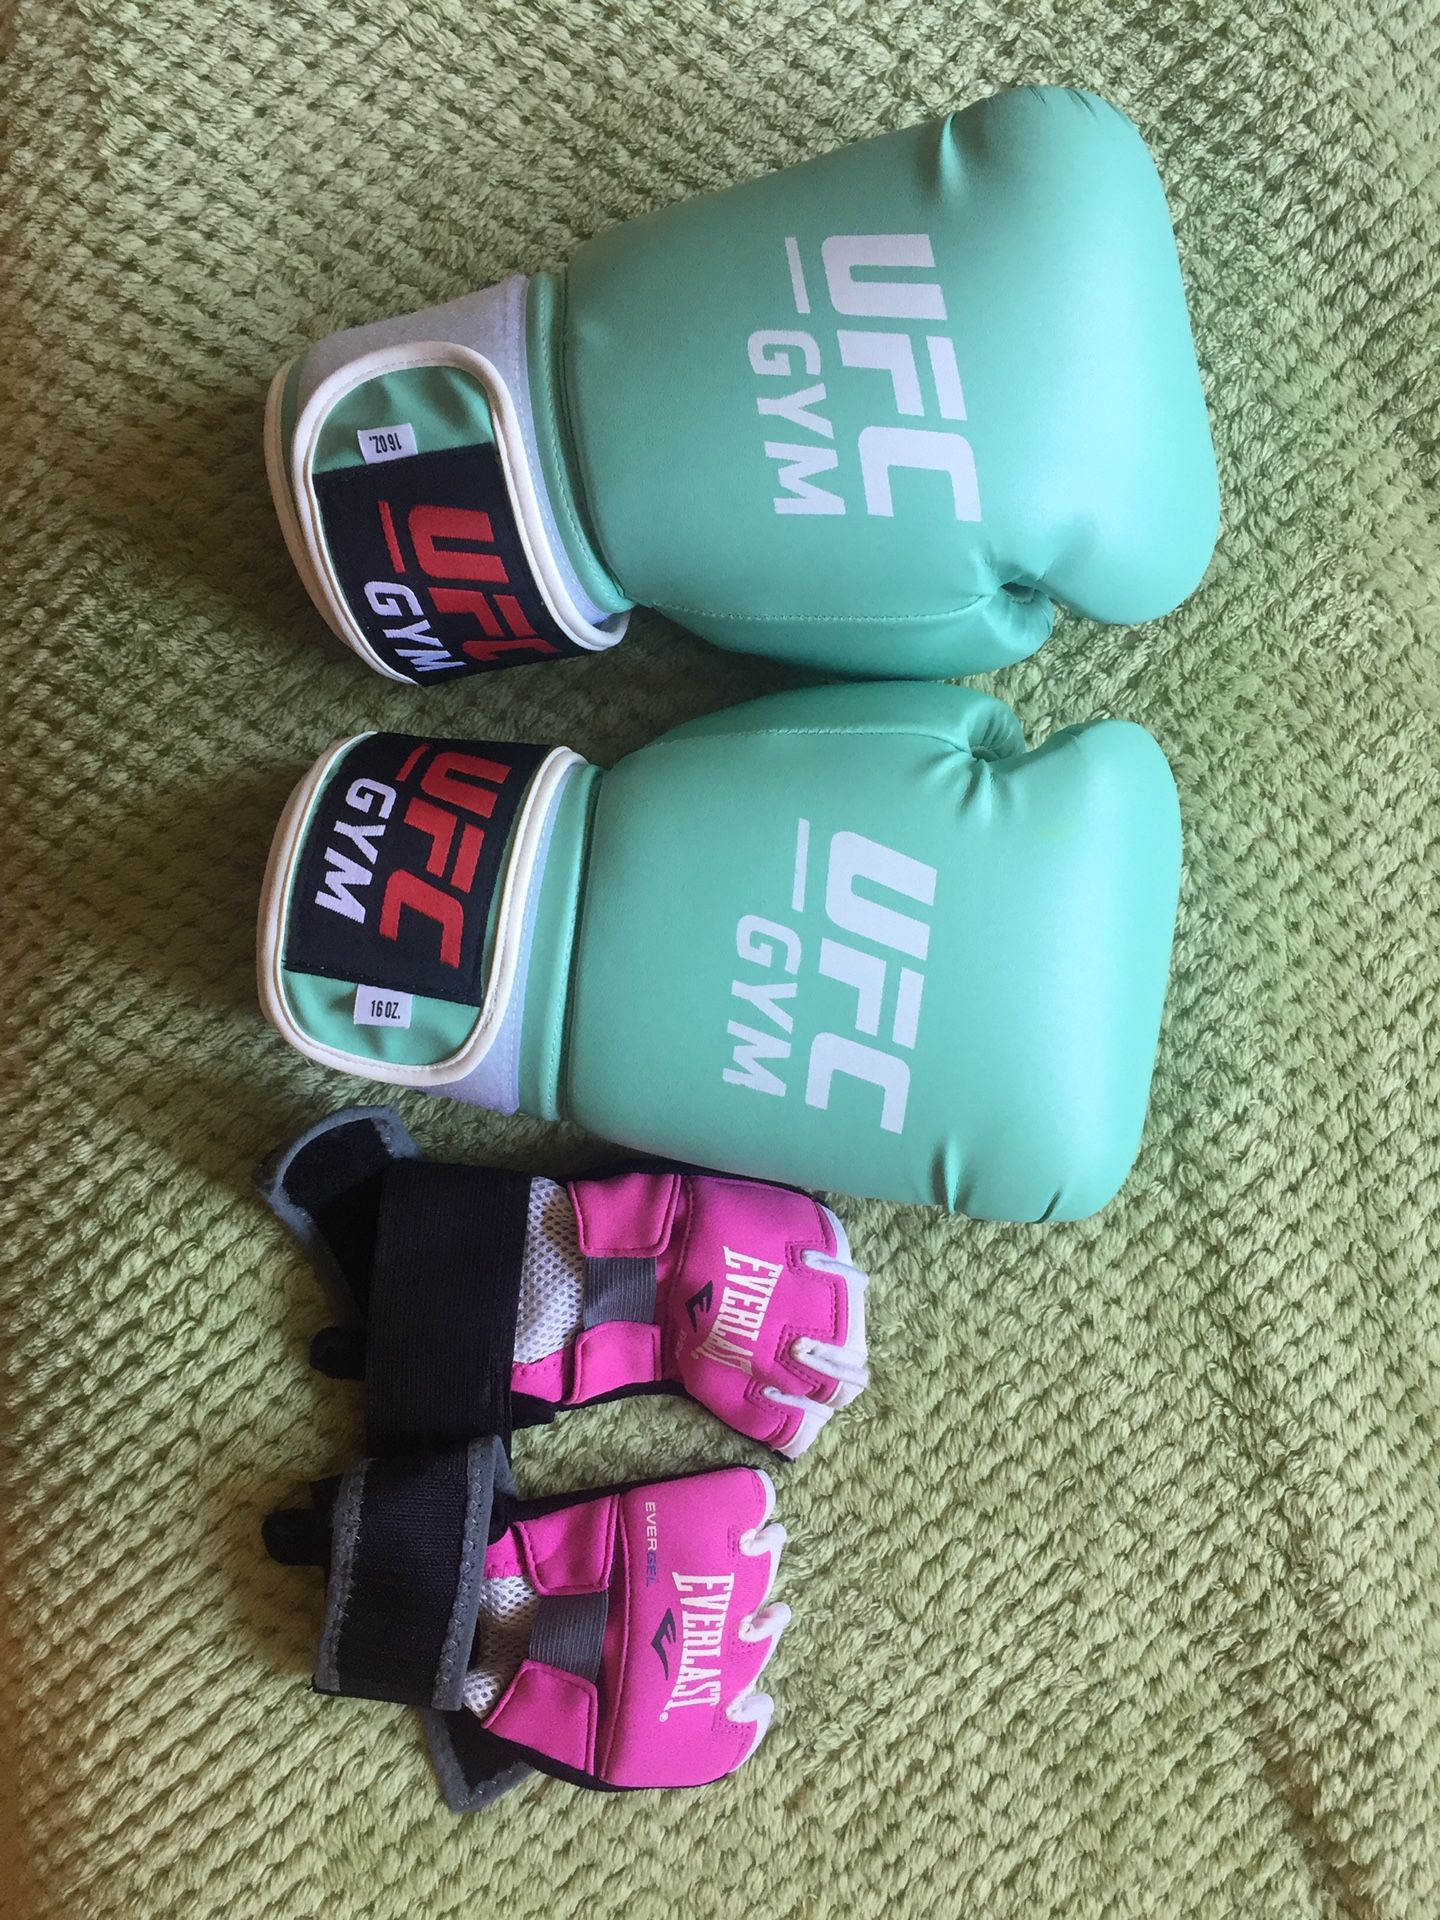 UFC boxing gloves and liners